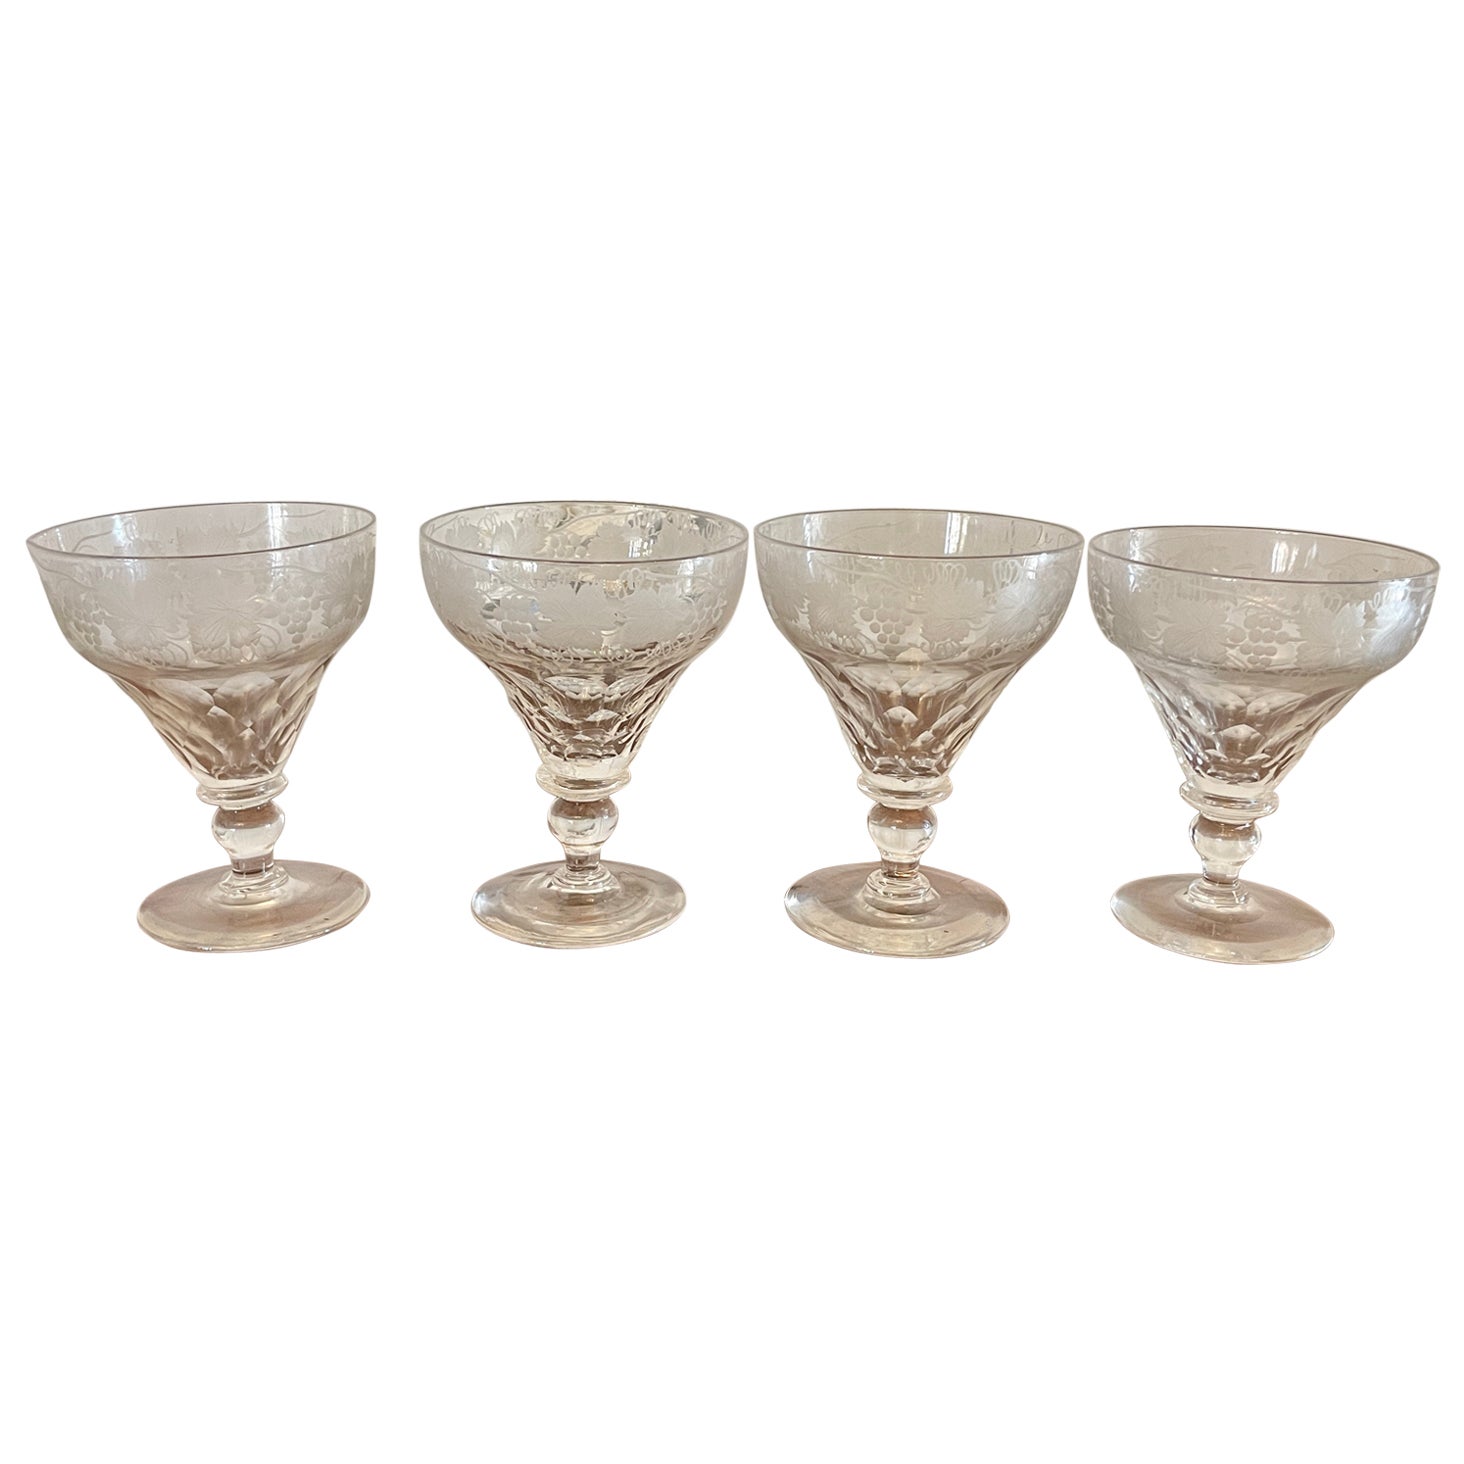 Unusual Large Set of 4 Antique Victorian Quality Engraved Glasses  For Sale